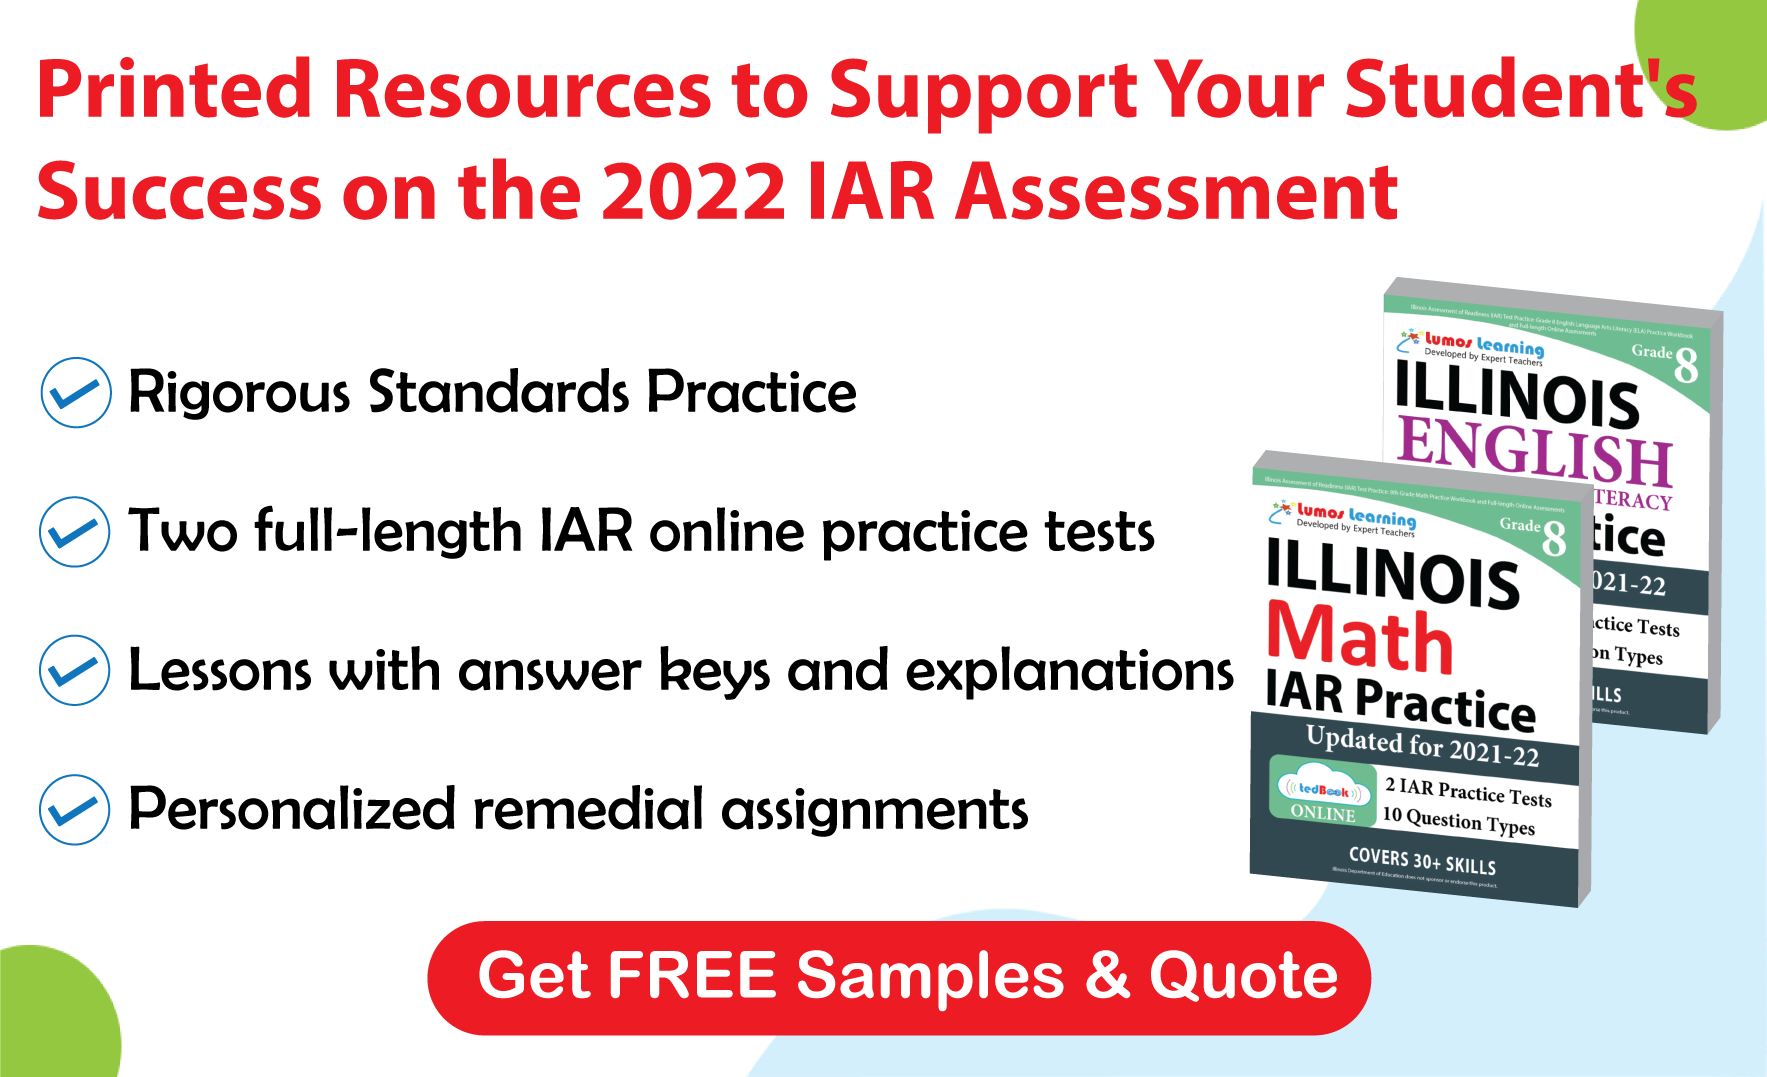 Lumos tedBook™ offers both Math and ELA printed workbooks, that are specifically designed to improve student achievement and help them succeed on the IAR Assessments.